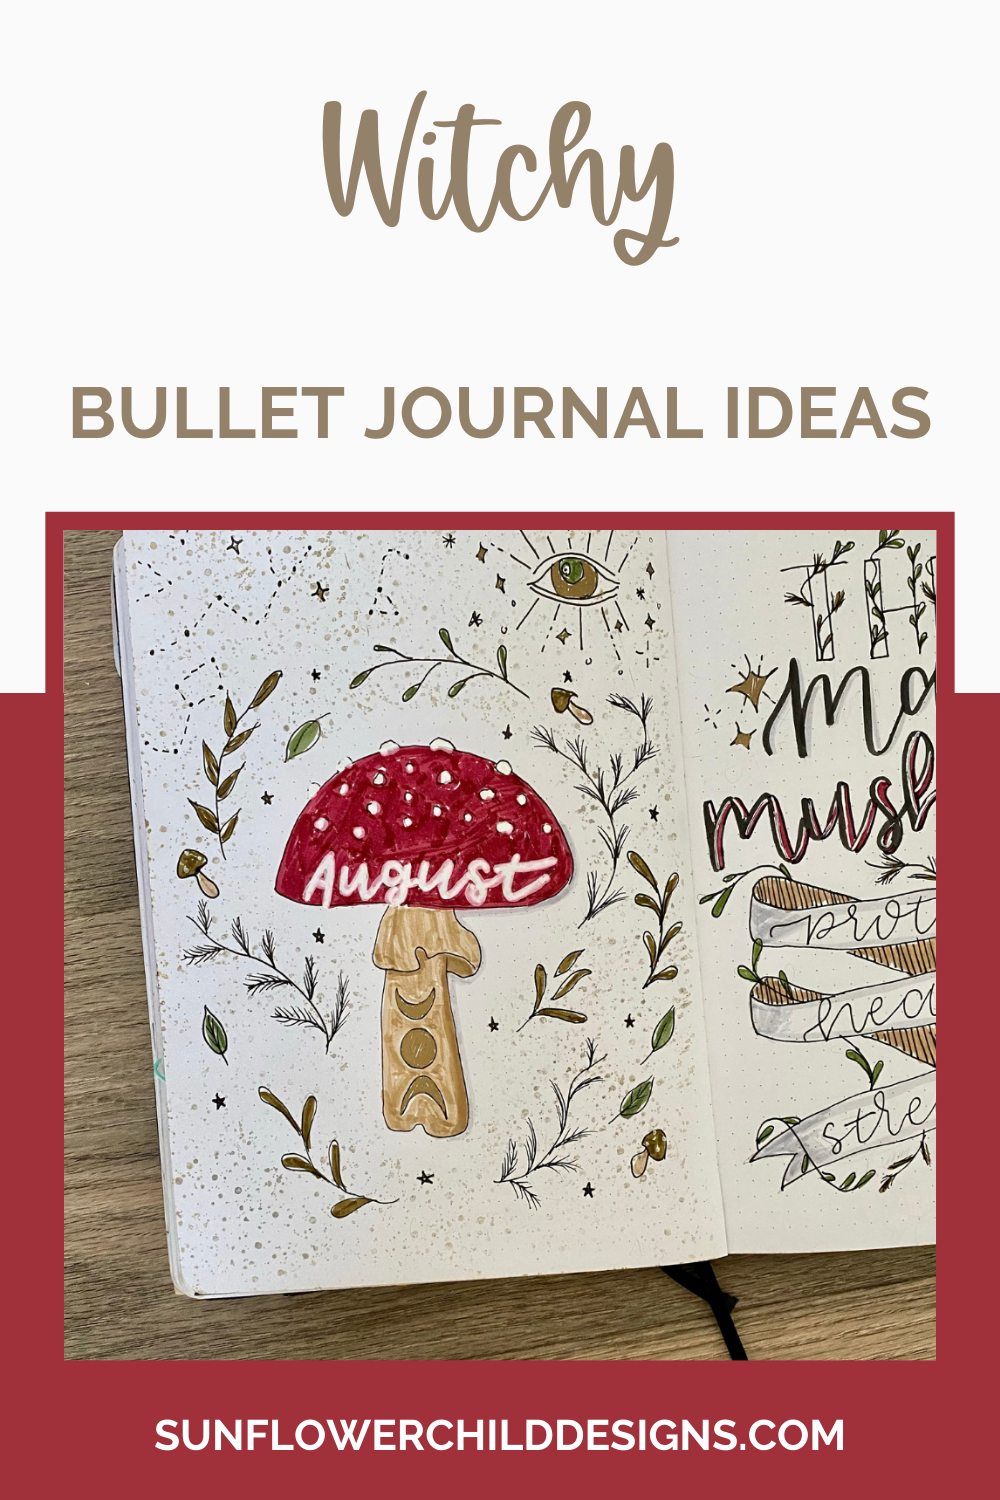 witchy-bullet-journal-ideas-august-bullet-journal-ideas 6.png